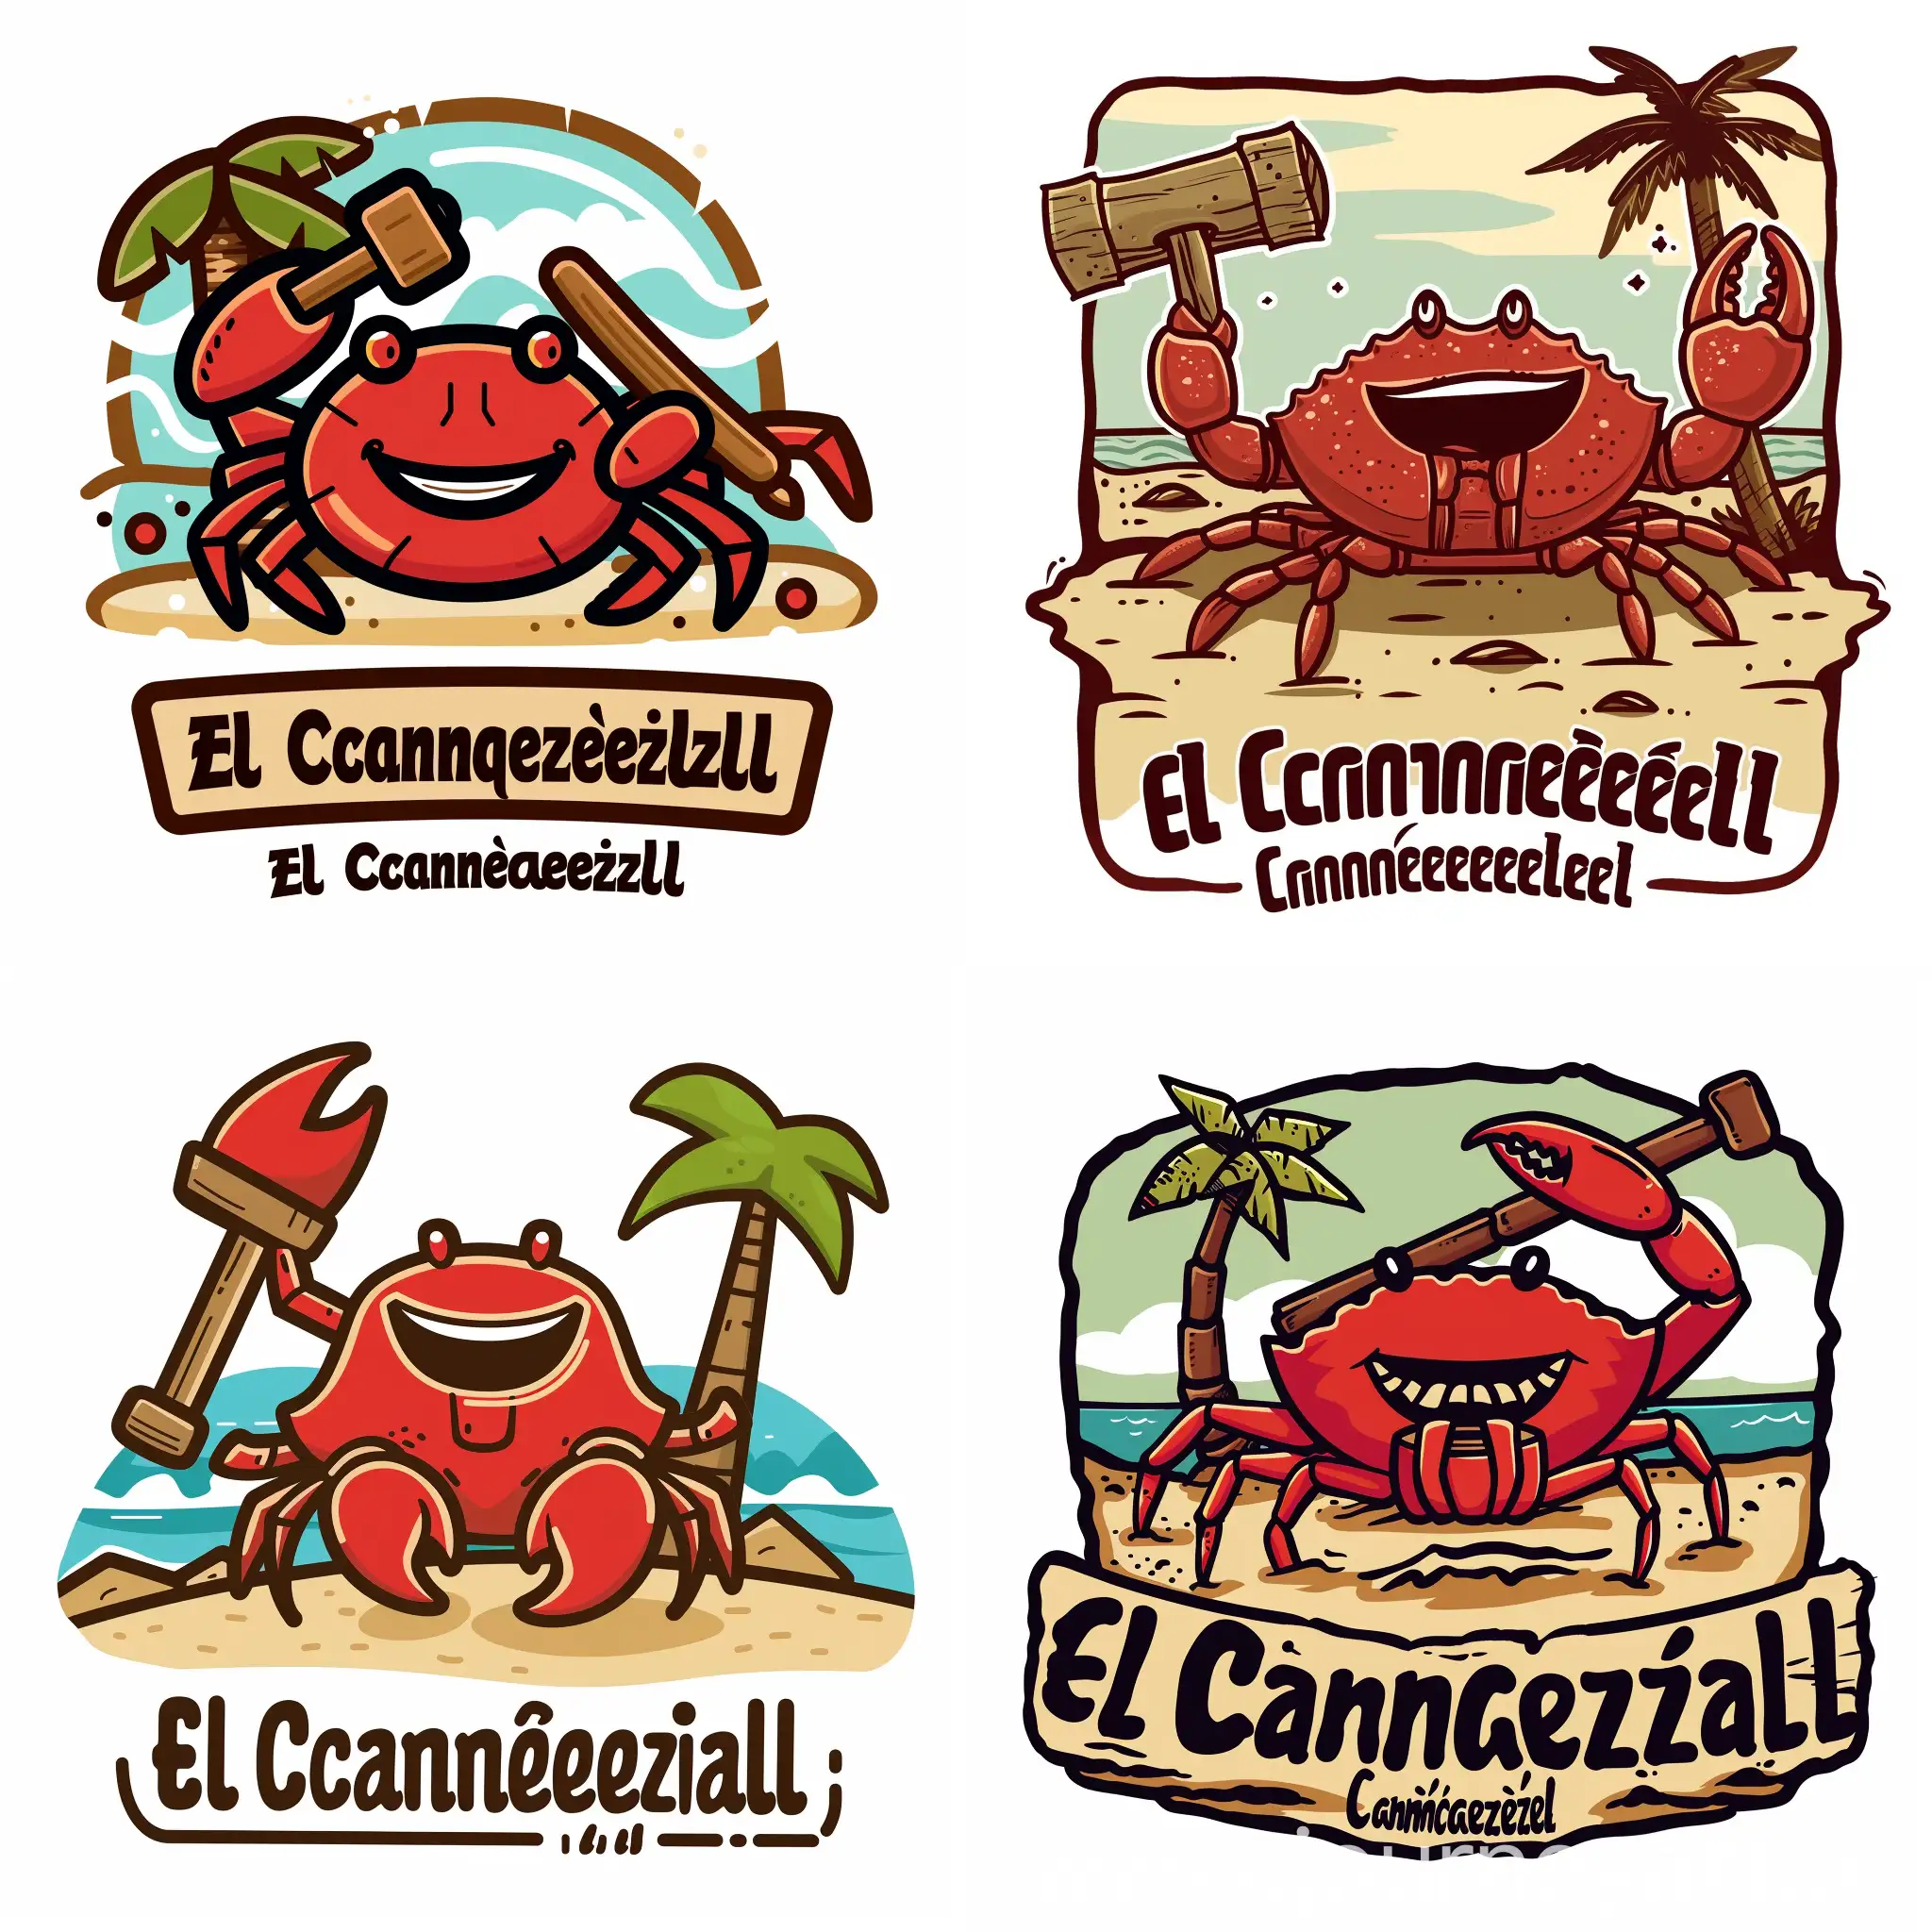 Friendly-Red-Crab-with-Wooden-Mallet-on-Beach-El-Canguerejal-Logo